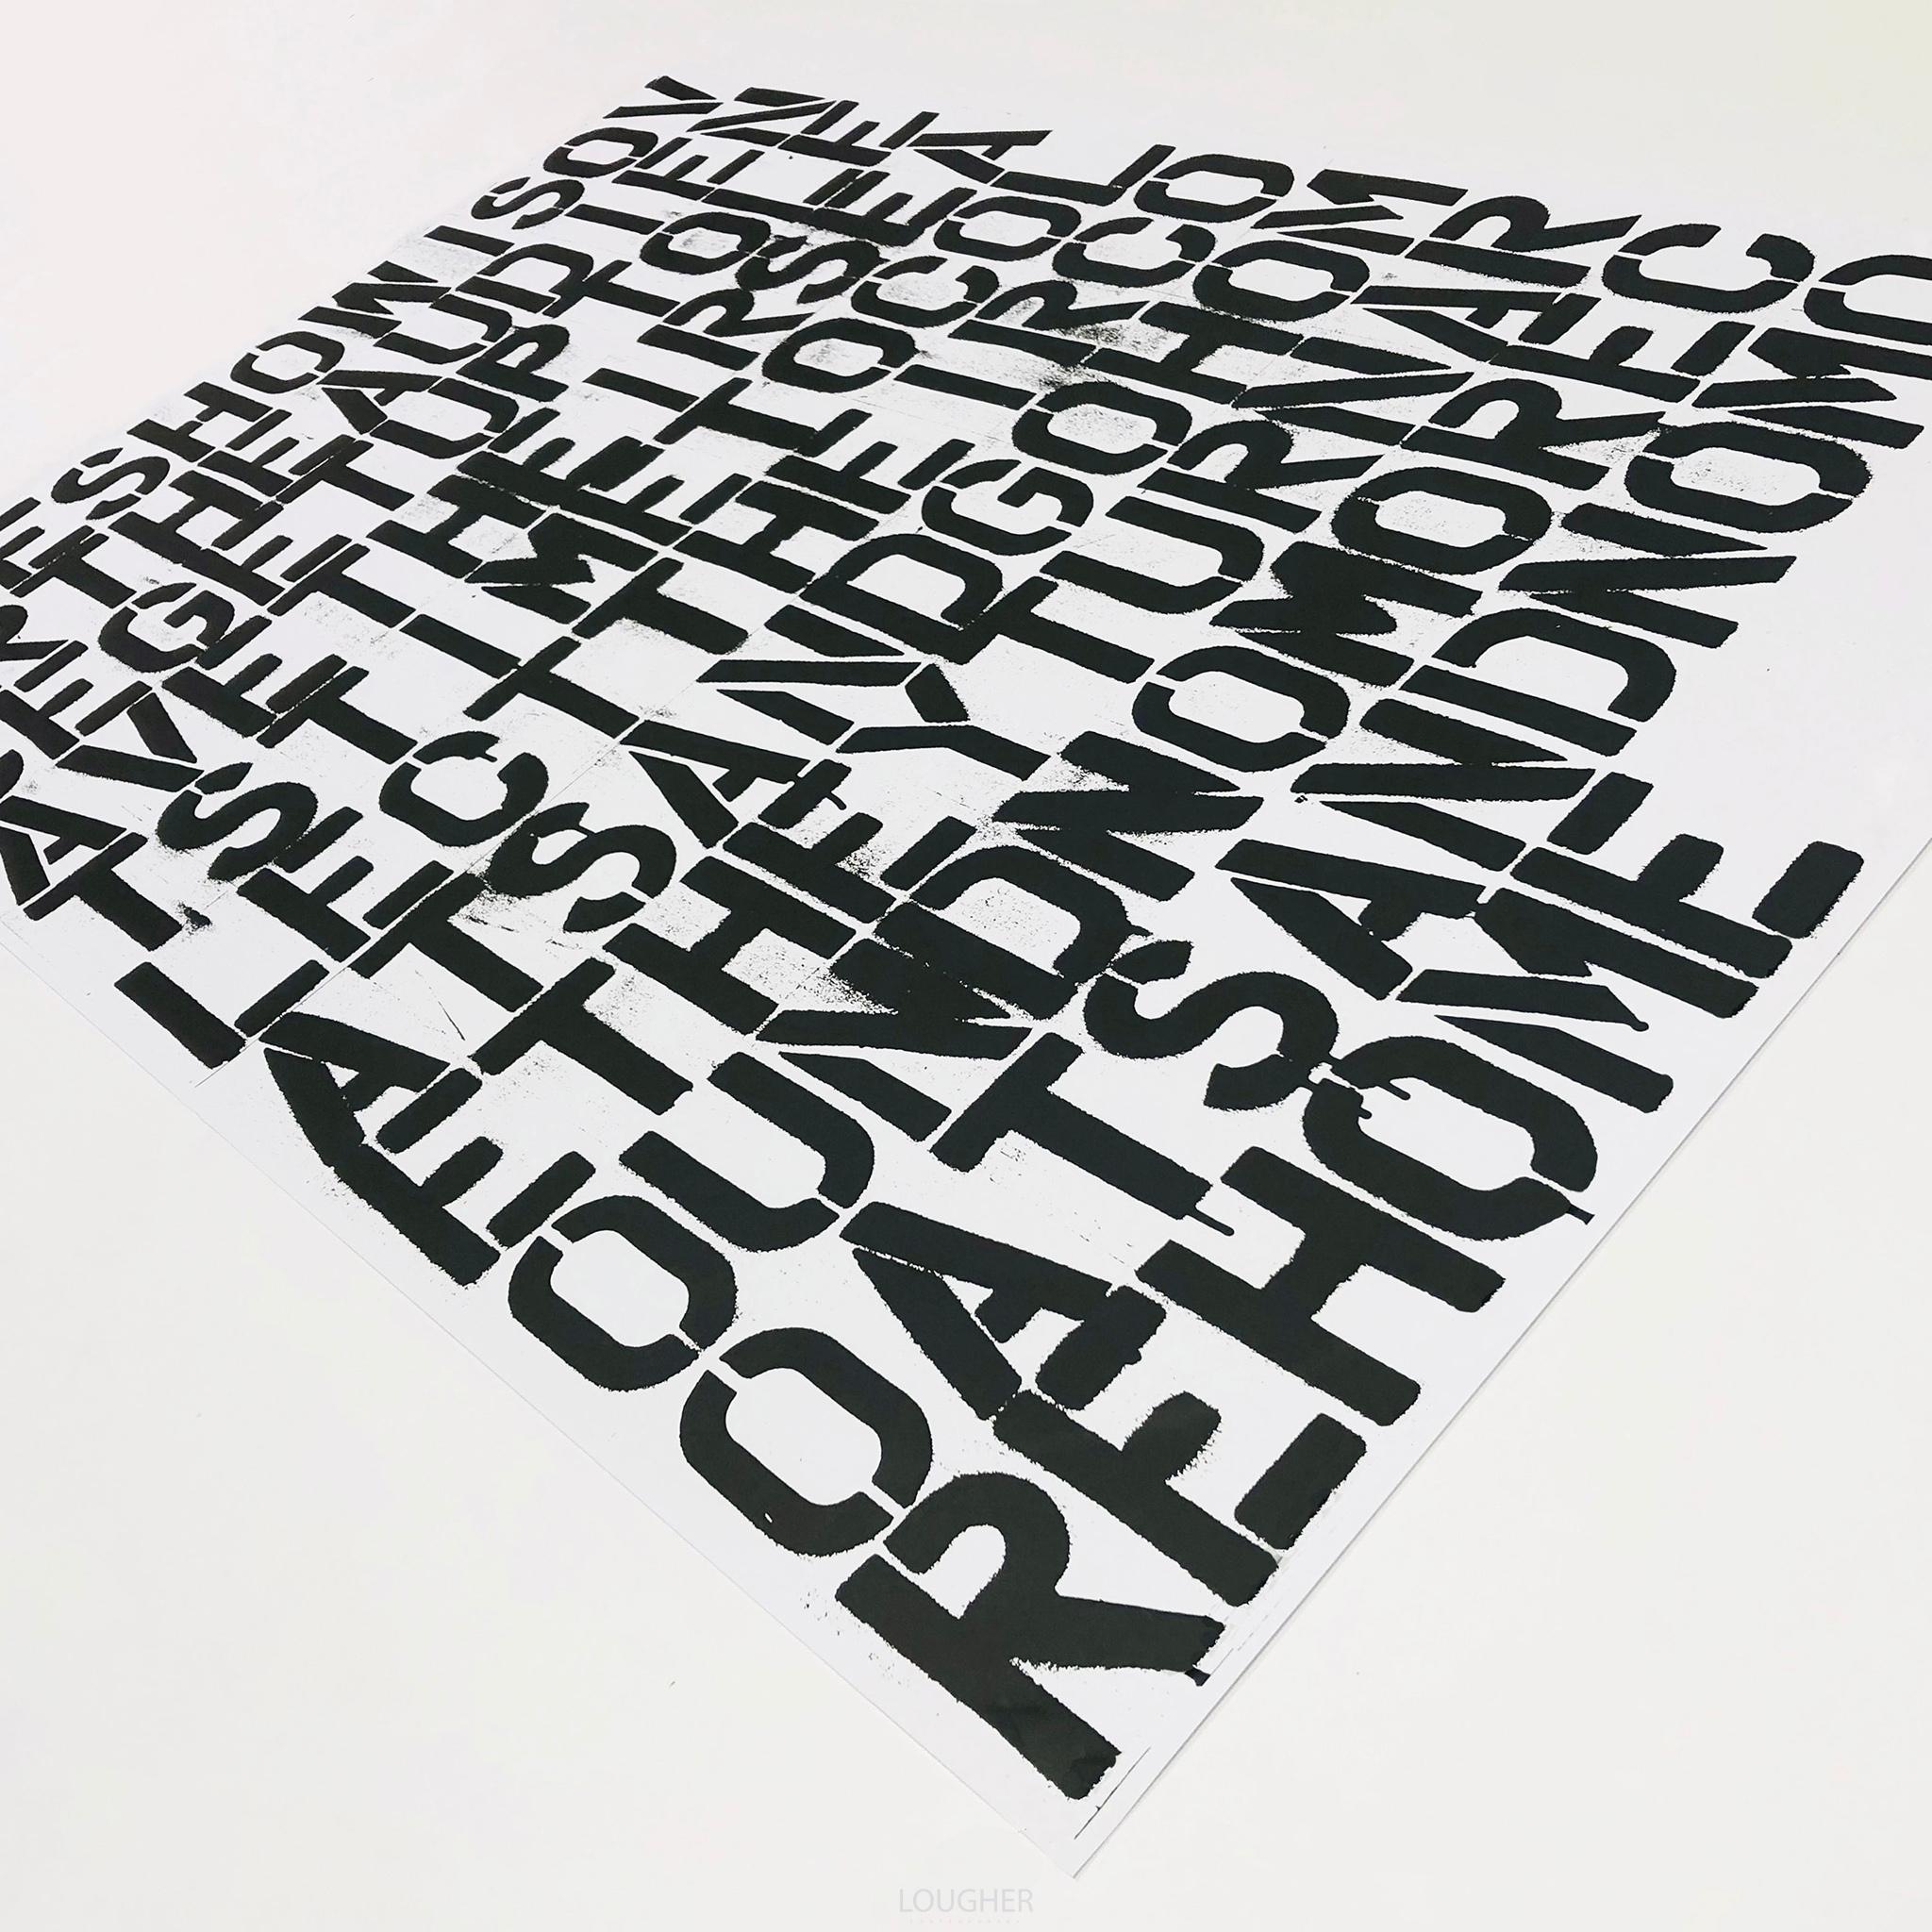 Untitled (The Show Is Over) - Contemporary Print by Christopher Wool